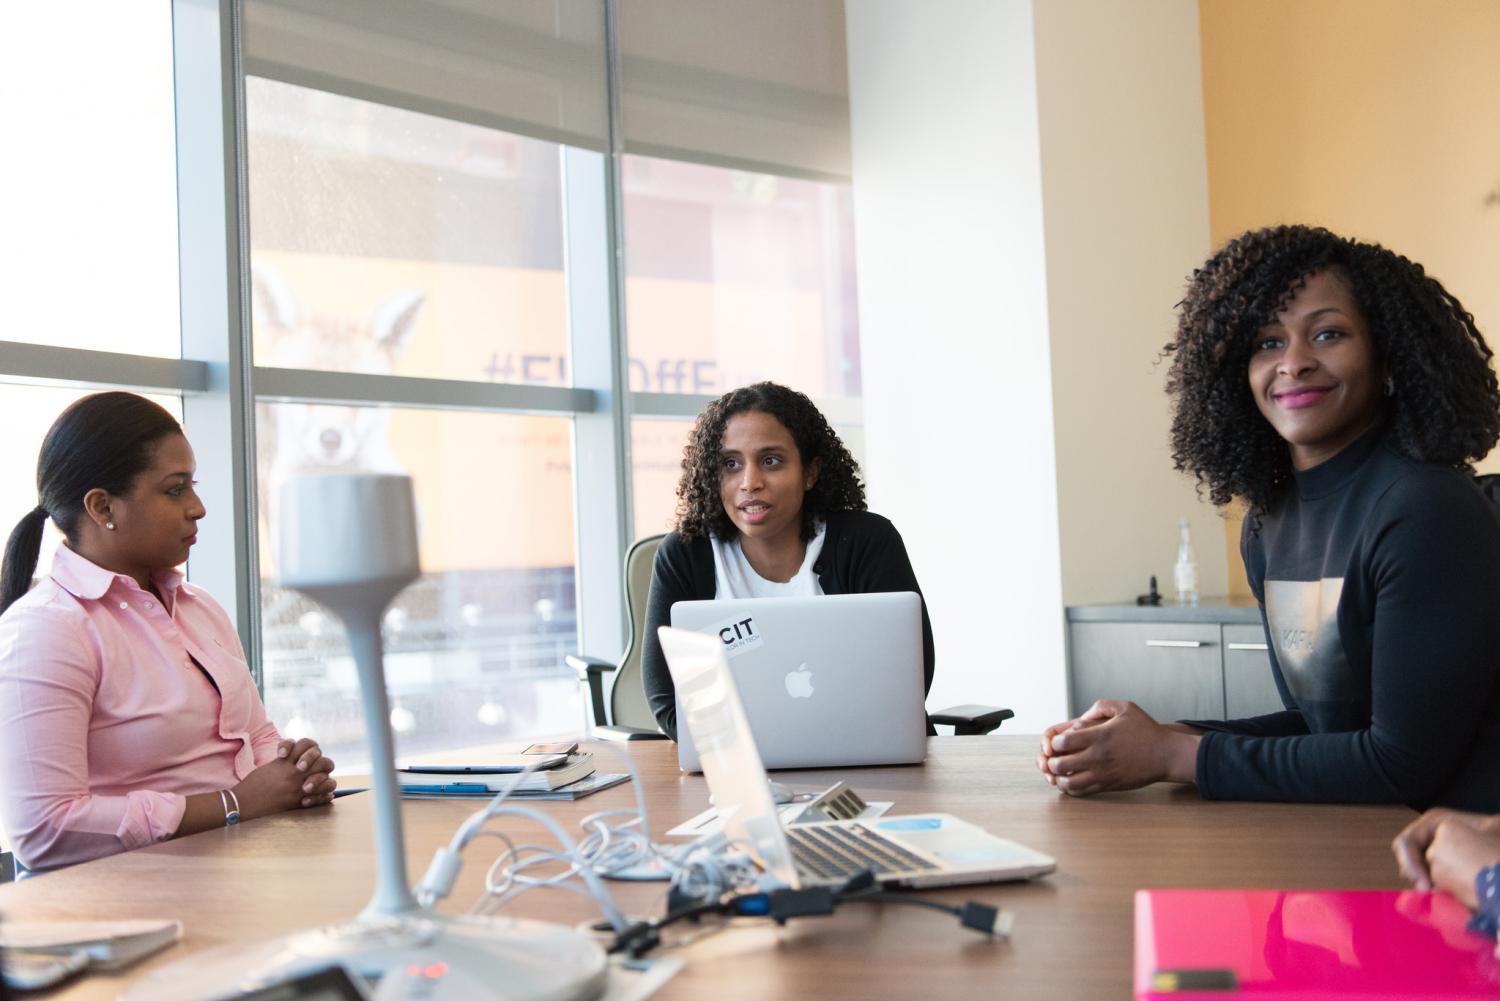 As women take impact investing by storm, the ripple effects are leading to more women in finance assuming leadership roles, with more female entrepreneurs reaping the benefits. 